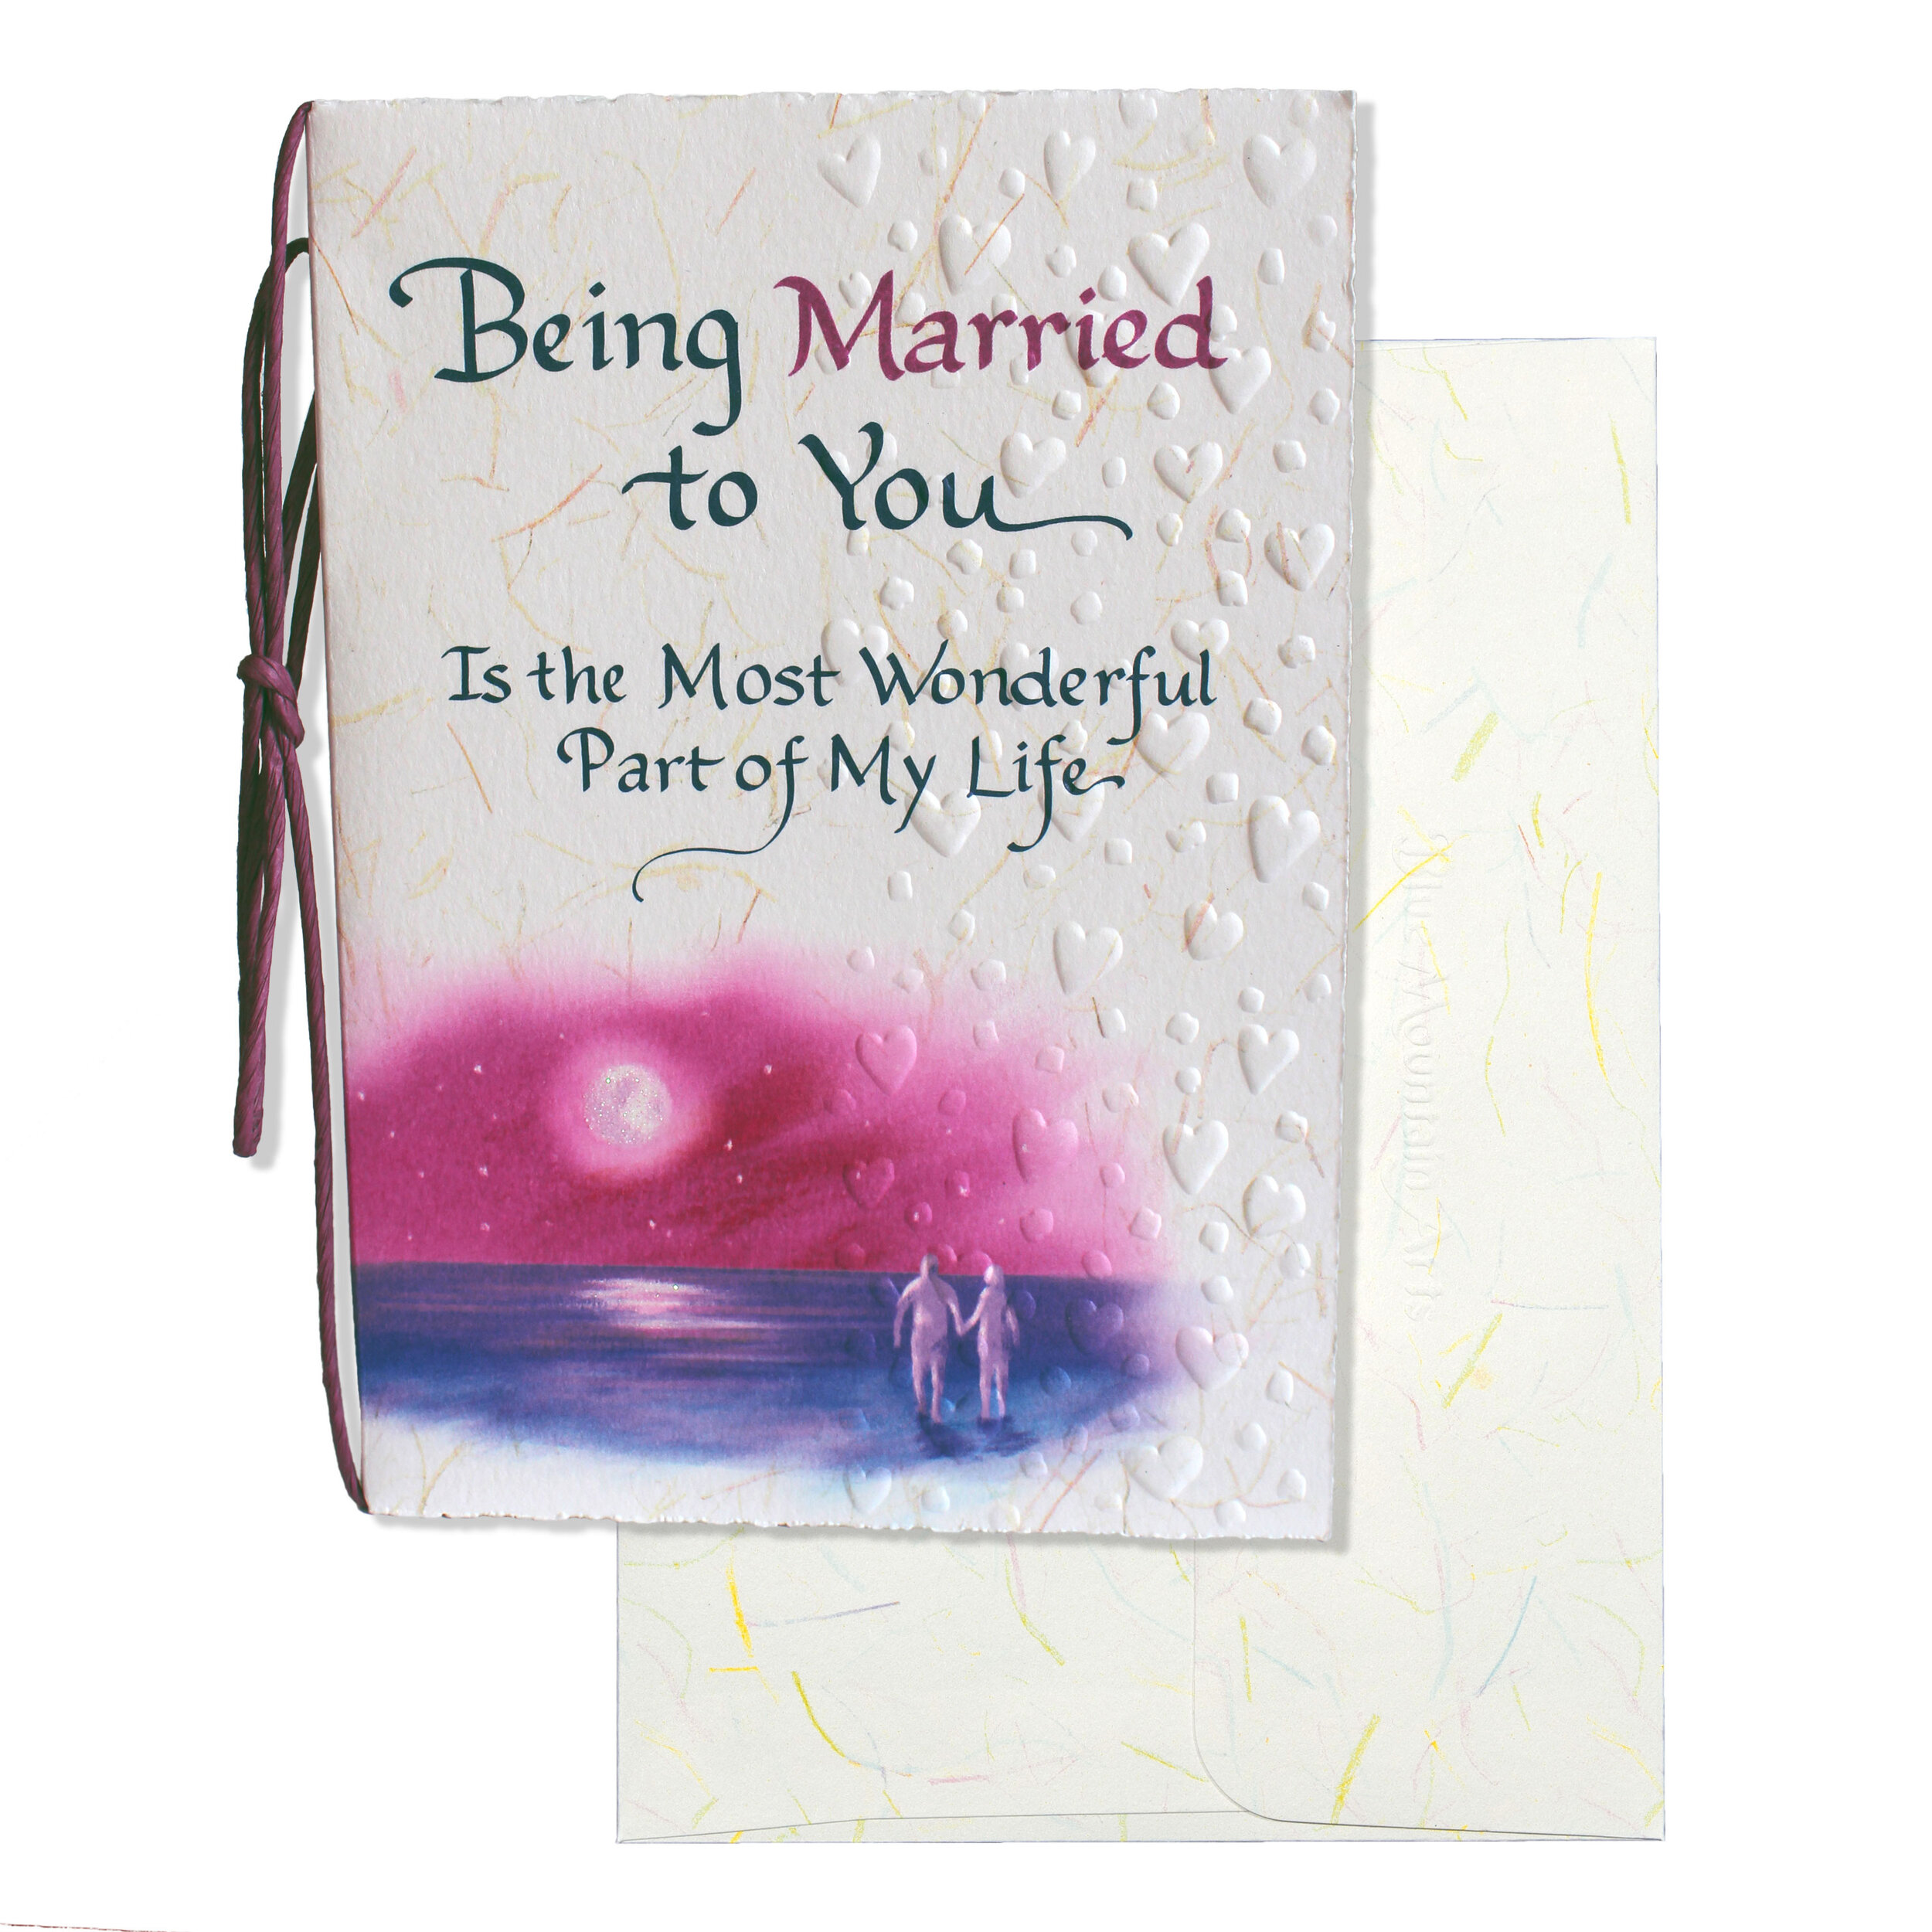 Friend or Loved One to Celebrate His or Her Special Day HW081 Blue Mountain Arts Greeting Card “A Birthday Is…” Is the Perfect “Happy Birthday” Message for a Family Member by Donna Fargo 